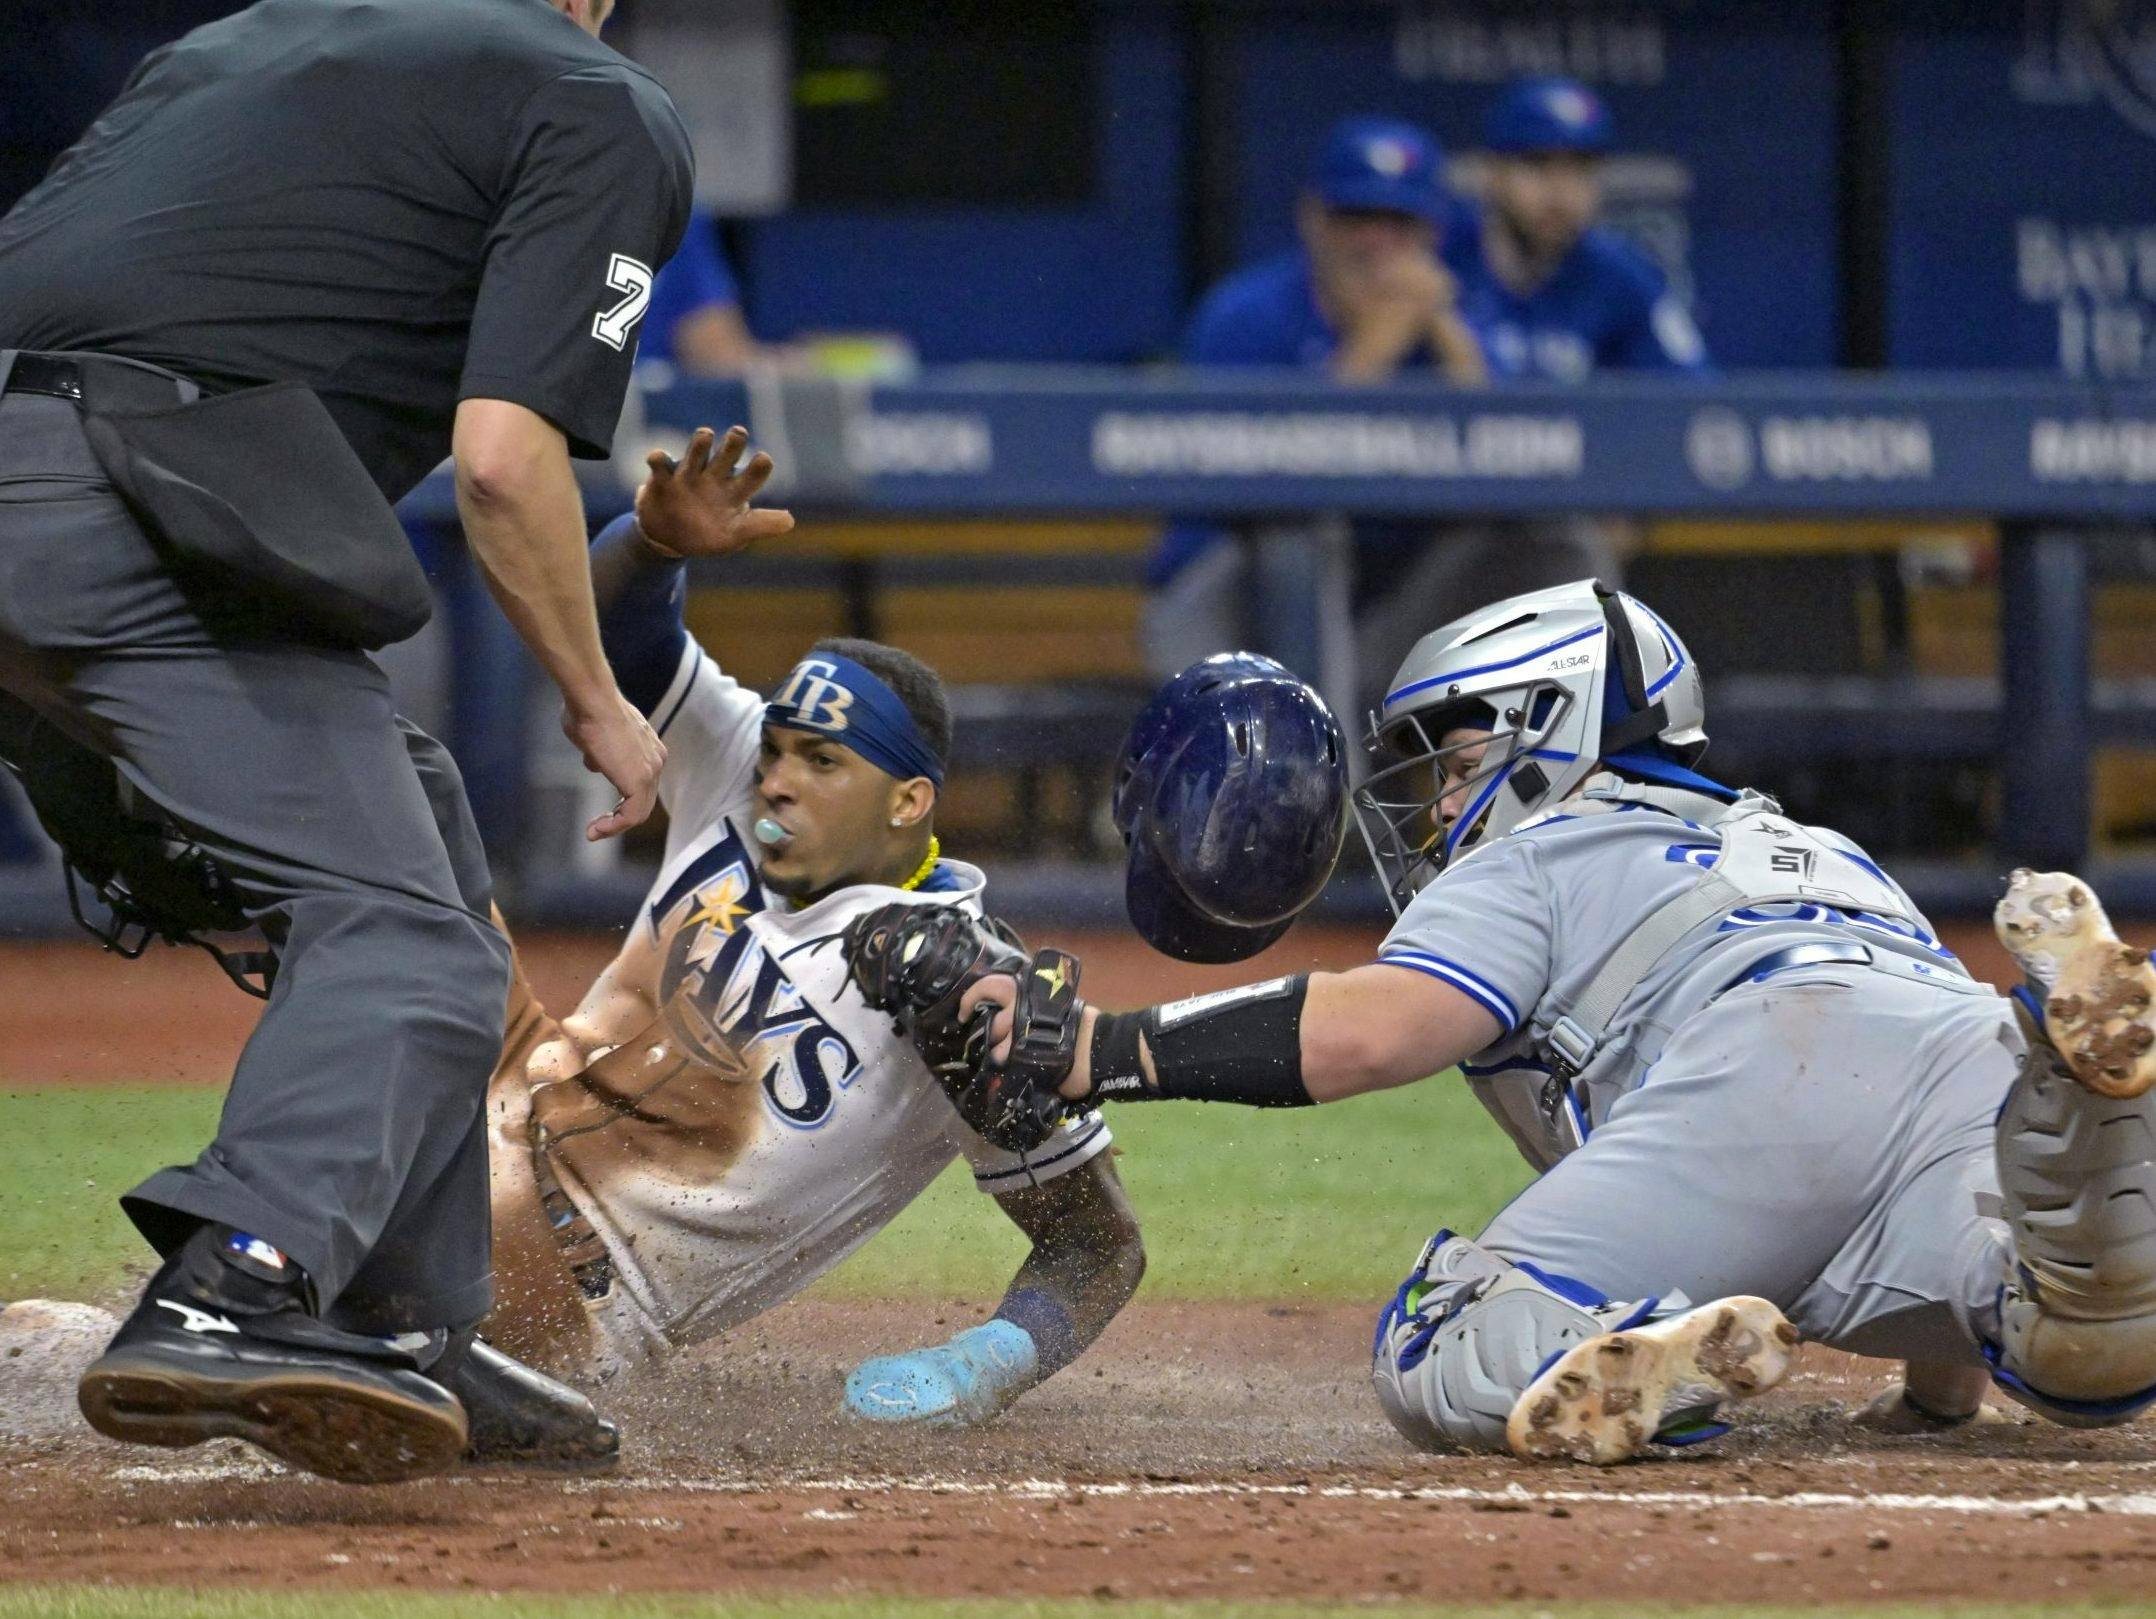 Rays hit 3 more HRs in 6-4 win over sliding Blue Jays